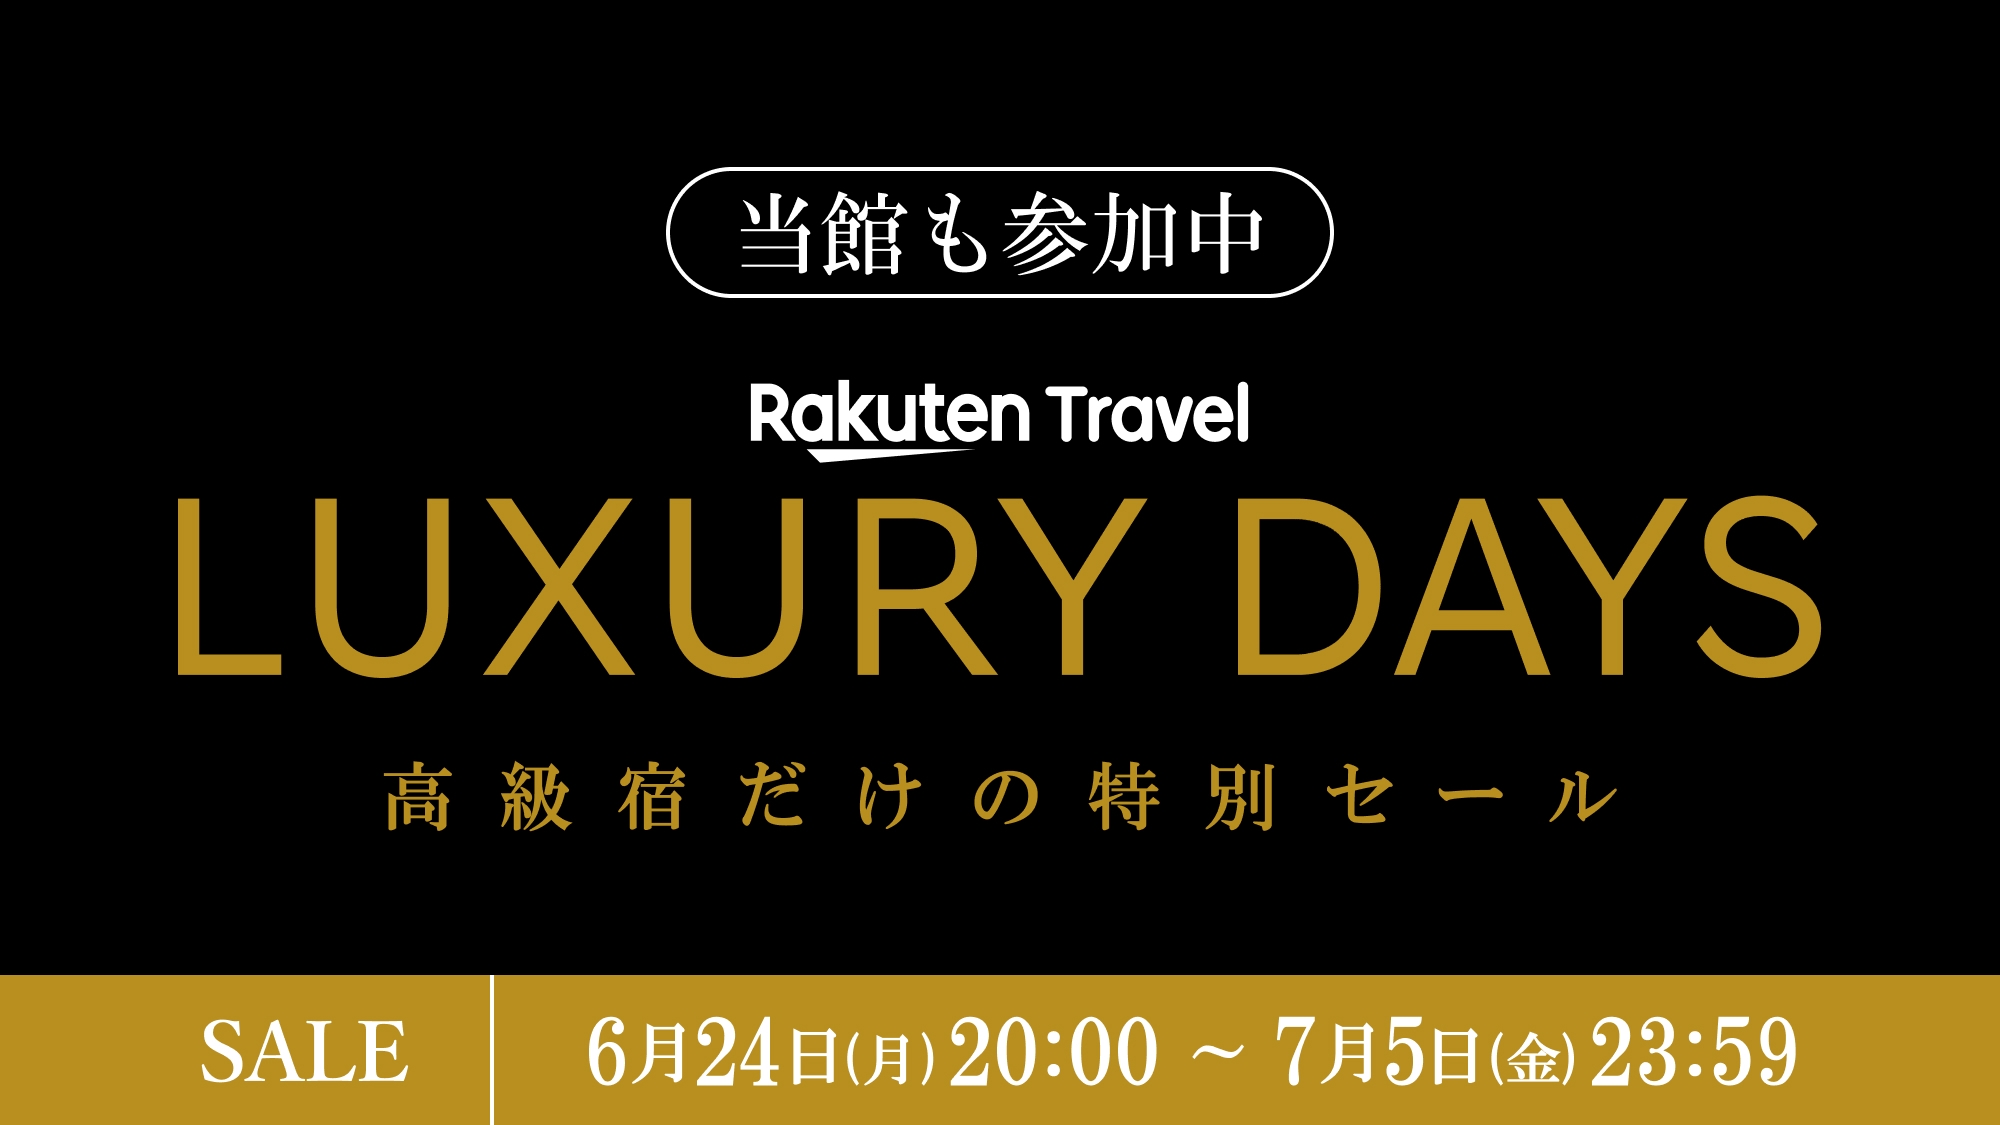 【LUXDAYSセール】＜全室26階以上＞SPECIAL OFFER（お食事なし）